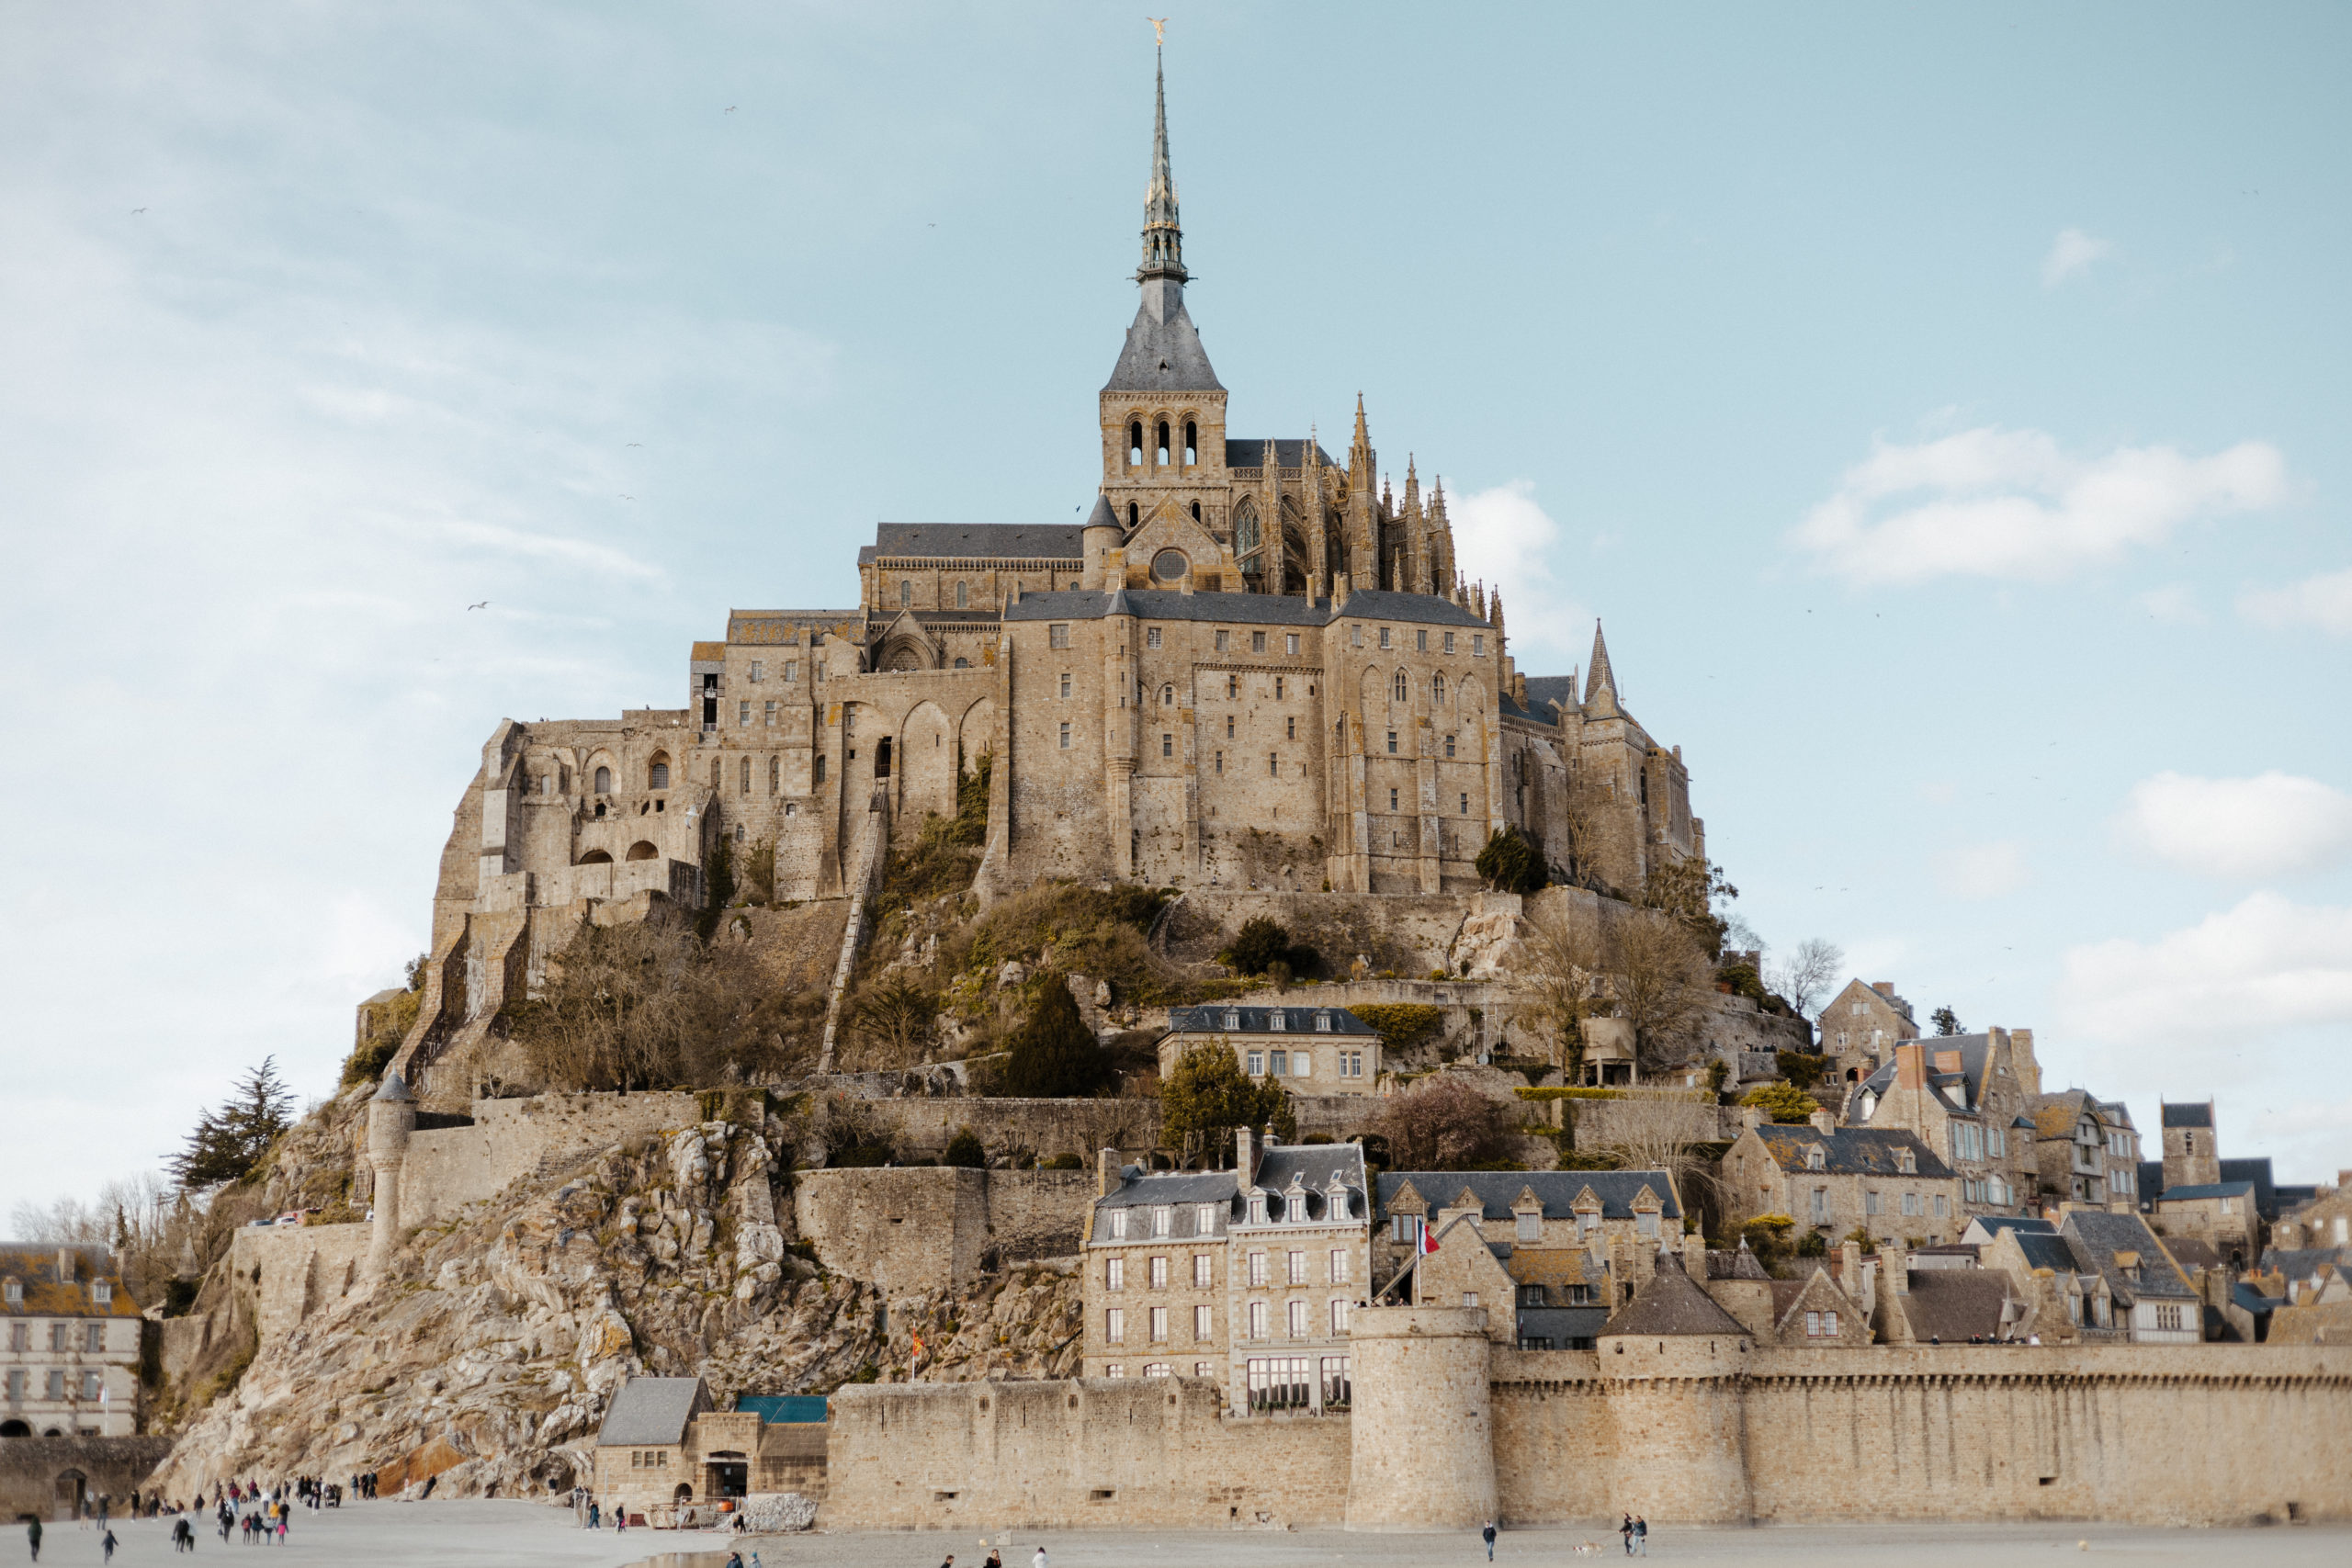 https://thewildlylife.com/wp-content/uploads/2022/03/normandy-france-mont-saint-michel-28-scaled.jpg